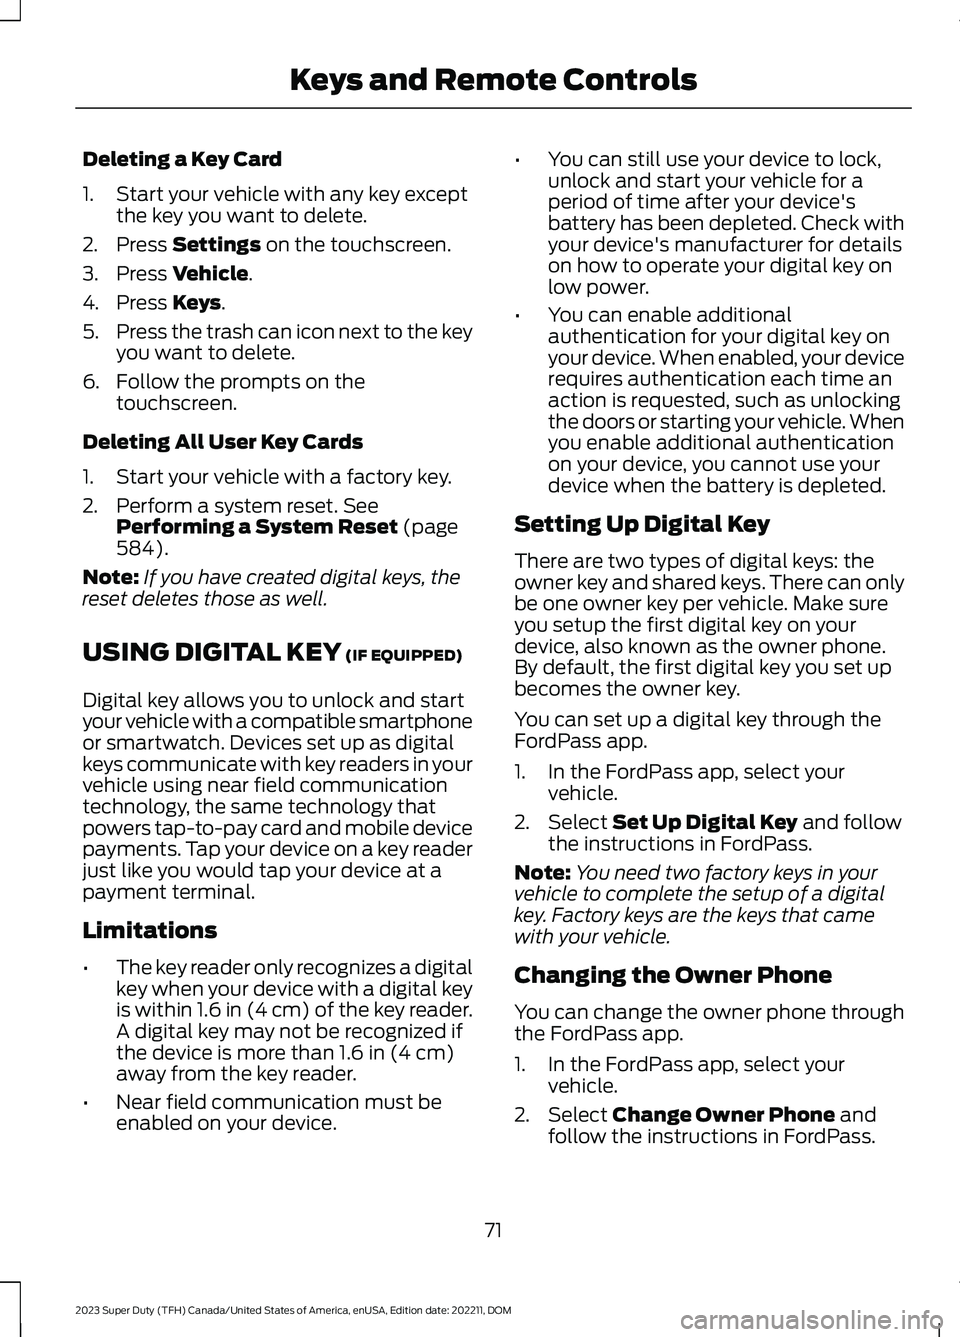 FORD SUPER DUTY 2023  Owners Manual Deleting a Key Card
1.Start your vehicle with any key exceptthe key you want to delete.
2.Press Settings on the touchscreen.
3.Press Vehicle.
4.Press Keys.
5.Press the trash can icon next to the keyyo